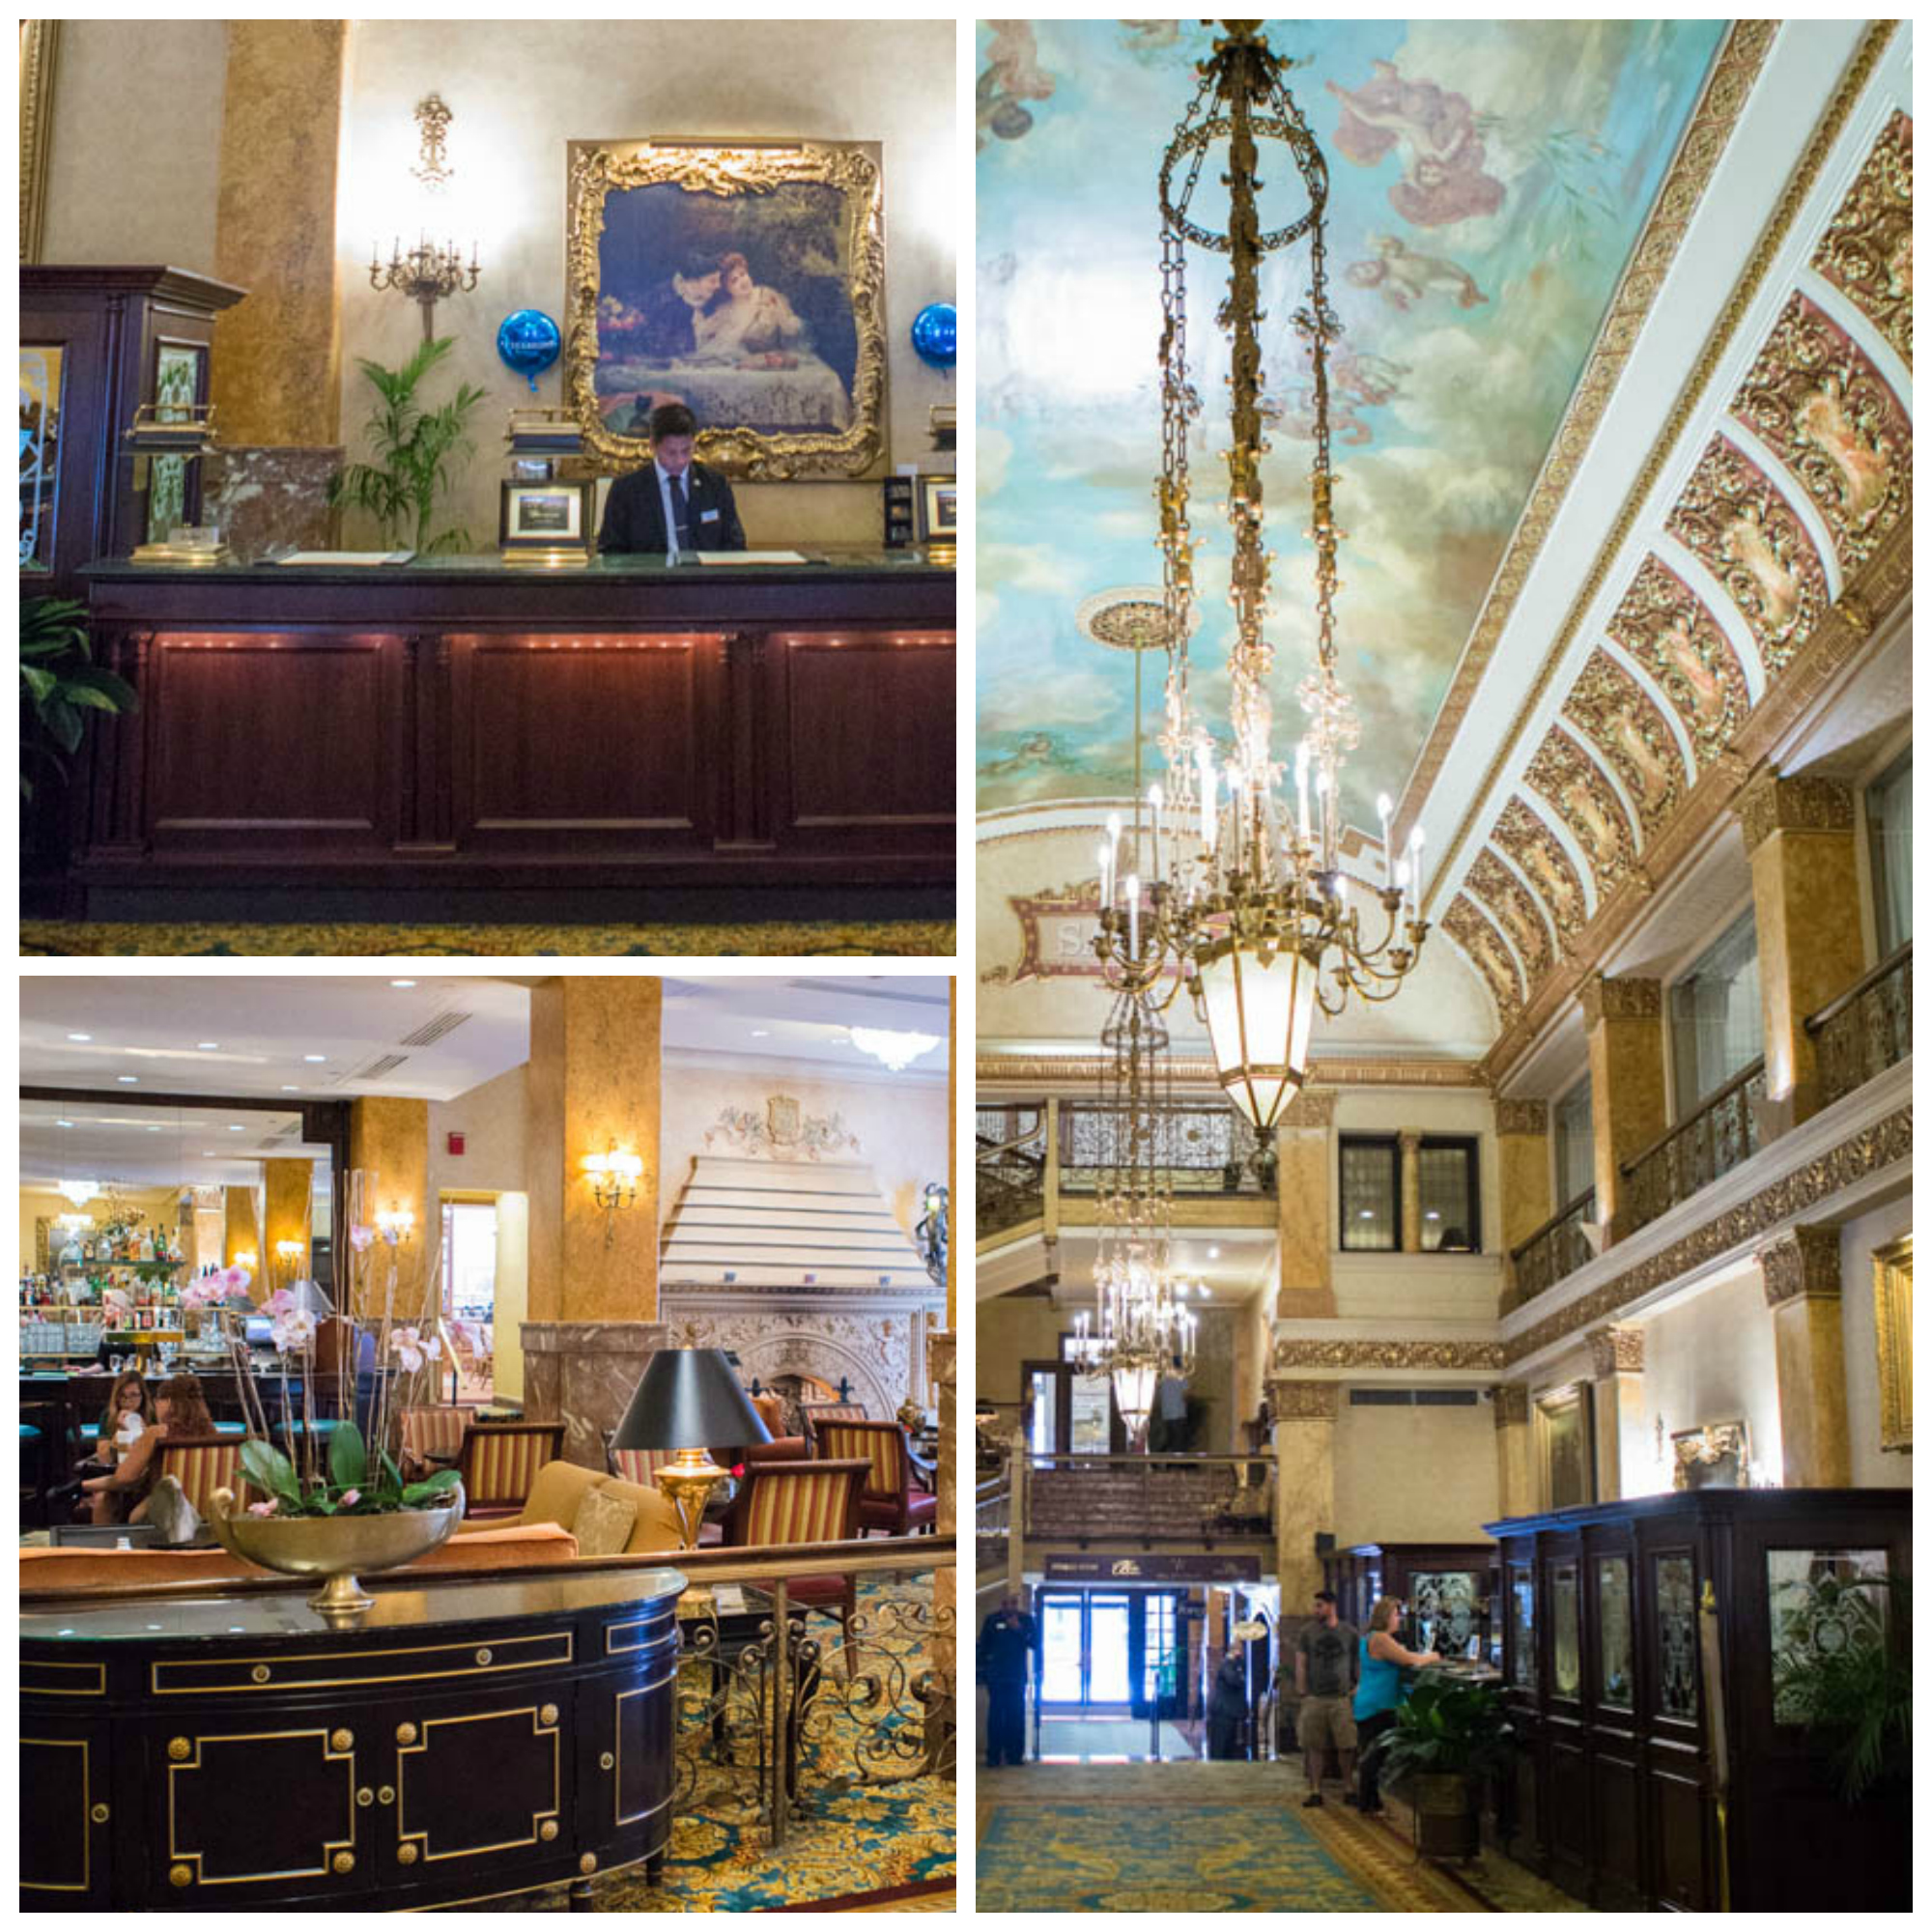 The Pfister in Milwaukee: The perfect spot for a romantic getaway